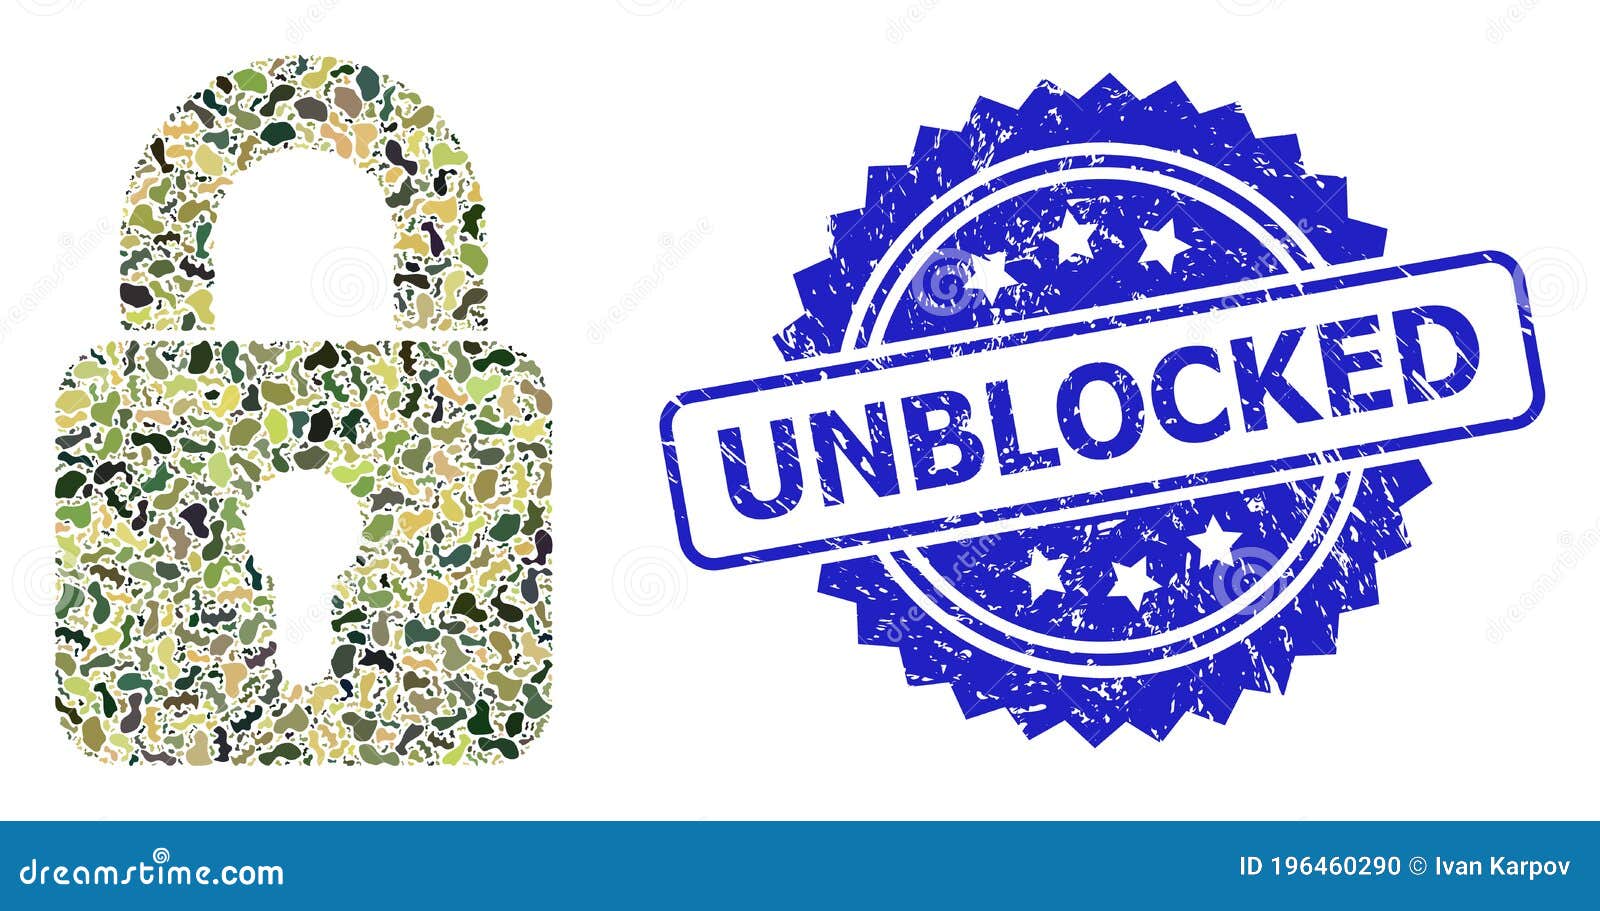 46 Unblocked Games Images, Stock Photos, 3D objects, & Vectors